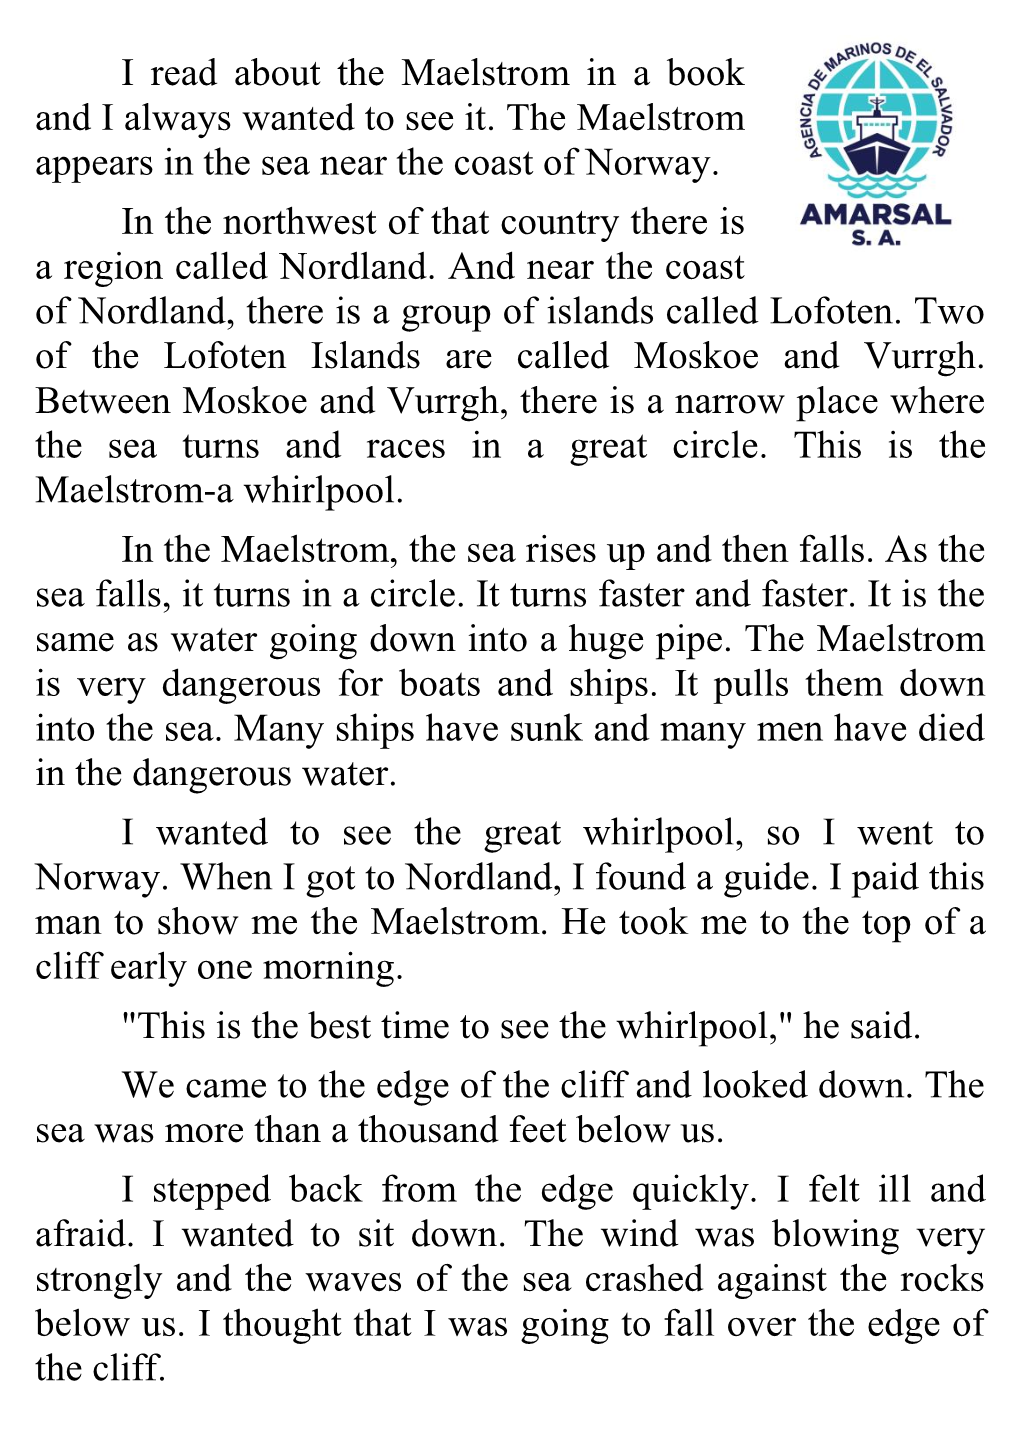 I Read About the Maelstrom in a Book and I Always Wanted to See It